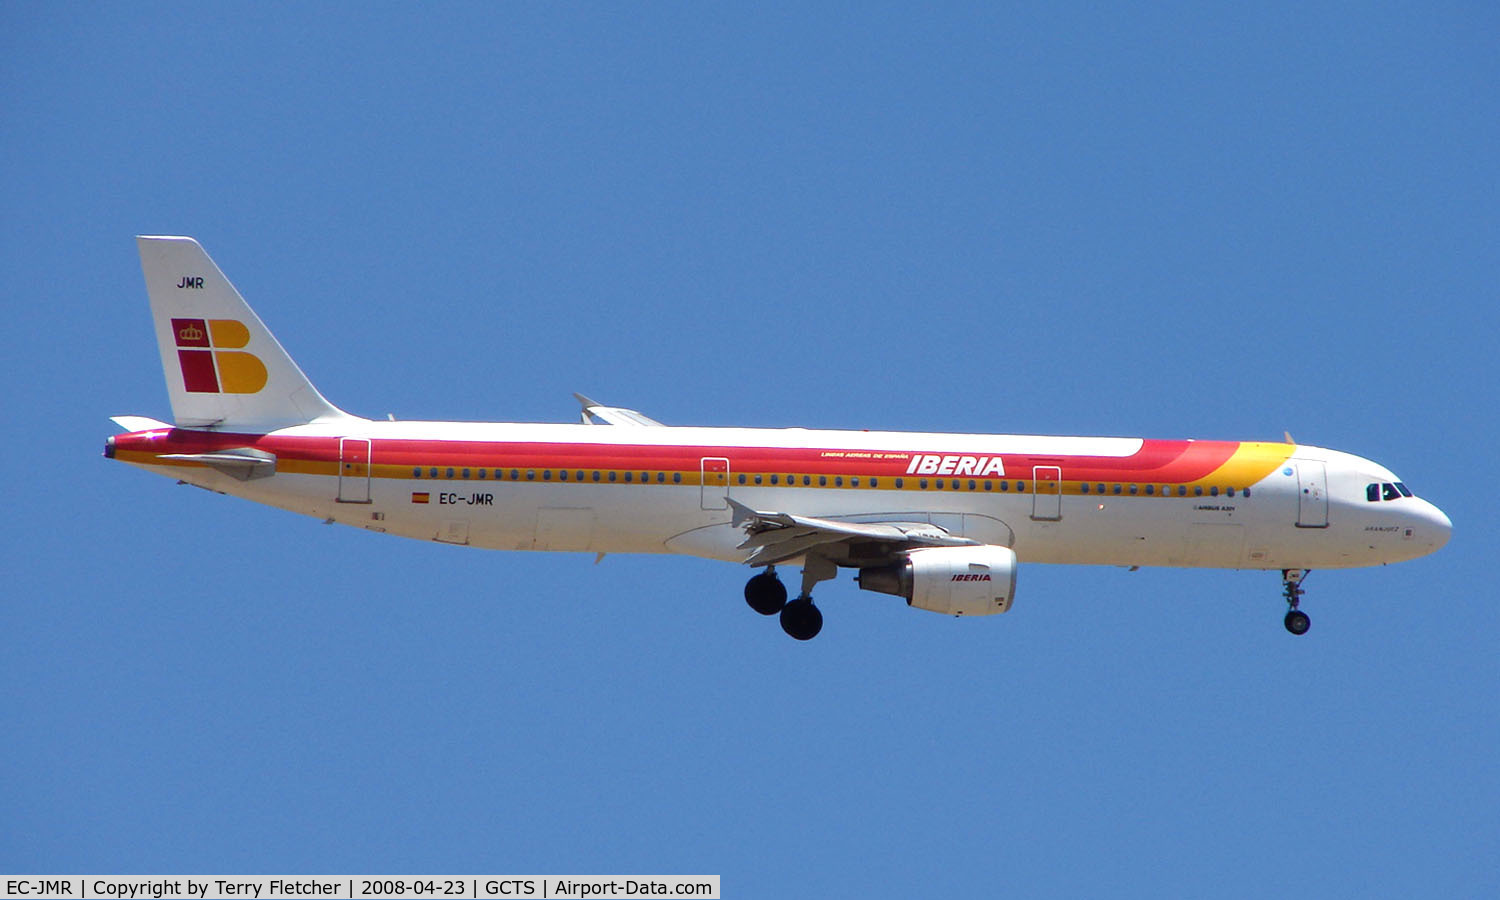 EC-JMR, 2005 Airbus A321-211 C/N 2599, Iberia A321 on the lunchtime arrival into Tenerife South from Madrid